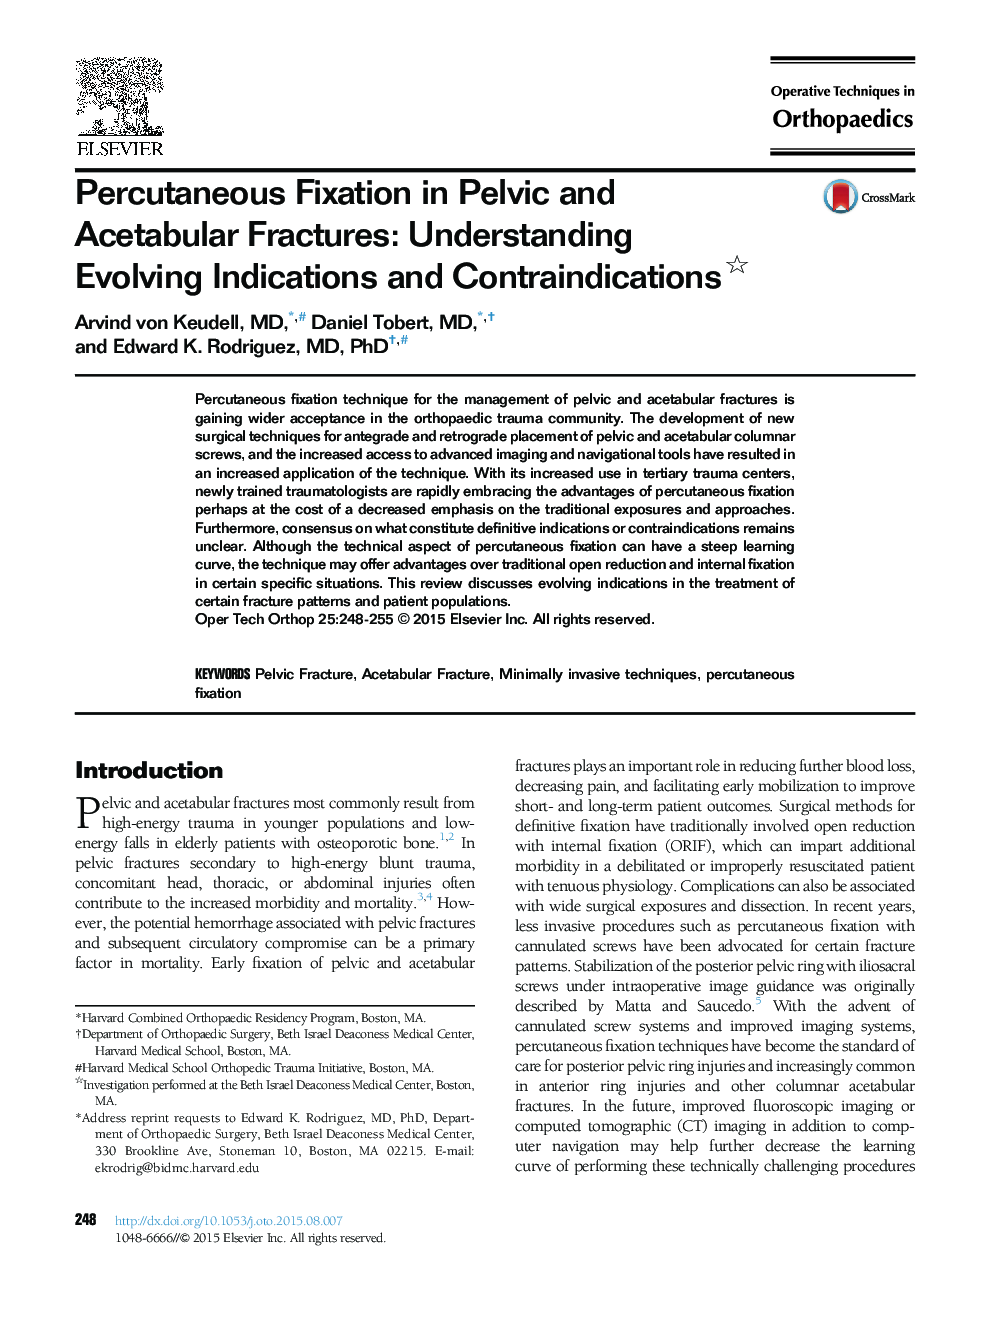 Percutaneous Fixation in Pelvic and Acetabular Fractures: Understanding Evolving Indications and Contraindications 